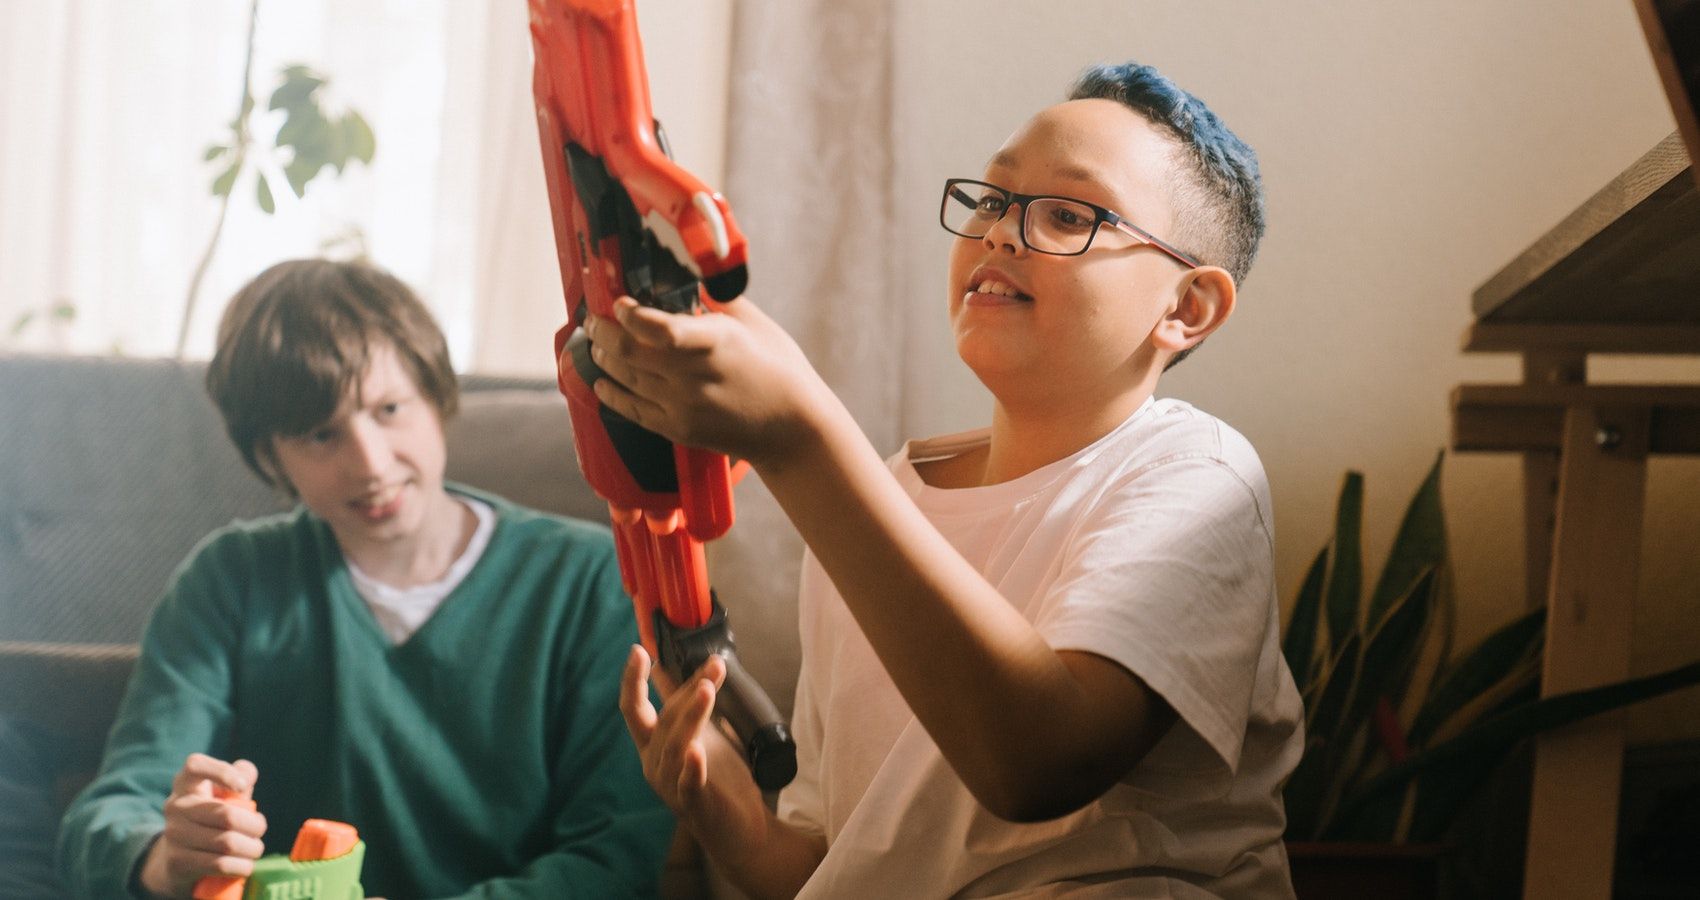 boy with a toy gun and friend